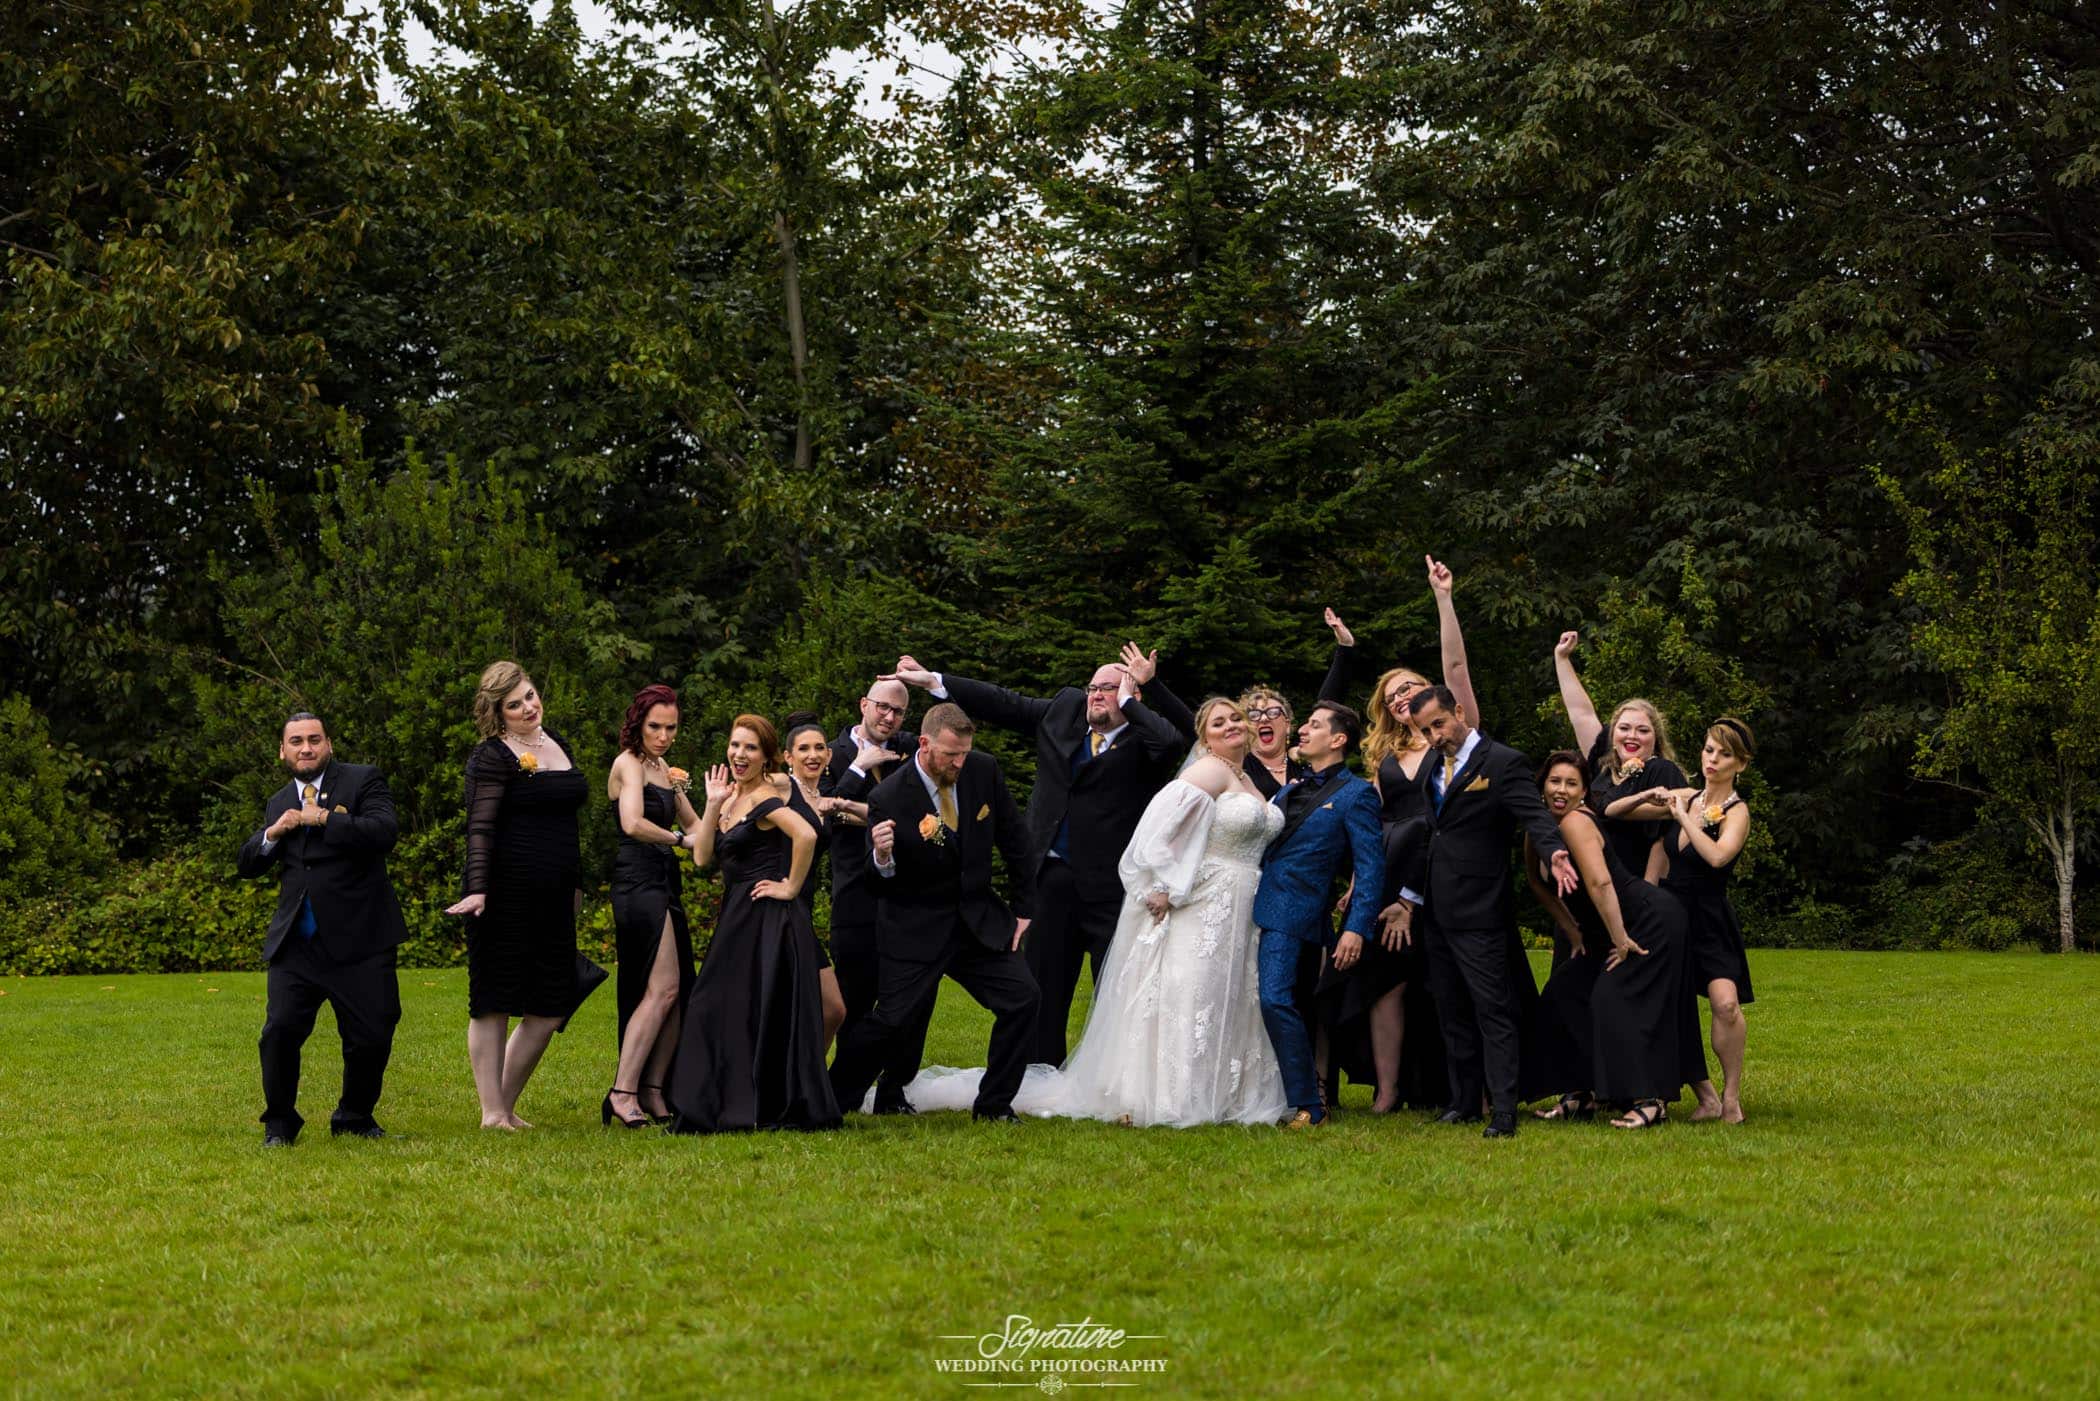 Bride and groom with wedding party doing funny pose